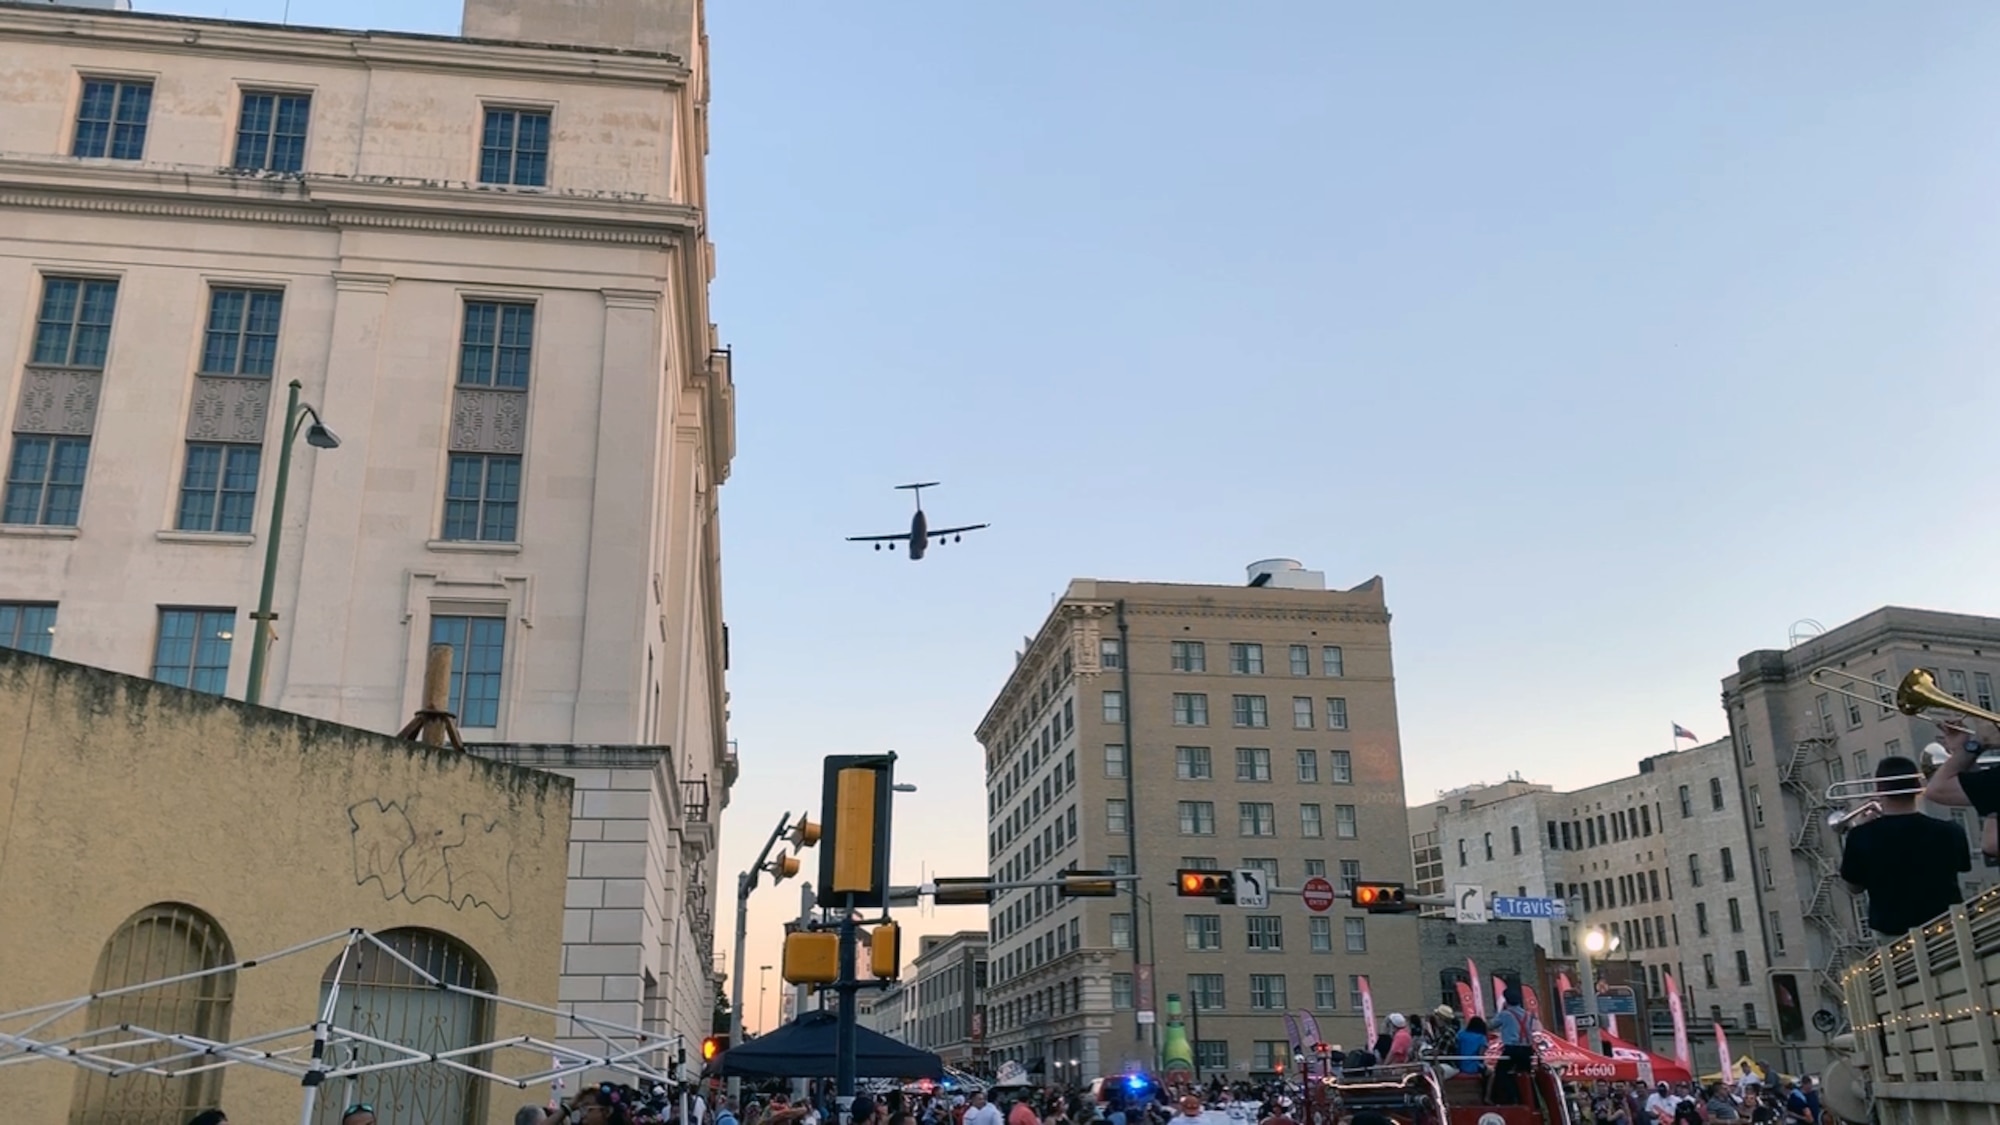 A 433rd Airlift Wing C-5M Super Galaxy flies over the Alamo at an altitude of 1,000 feet as the sun sets in downtown San Antonio as it approaches the Alamo during the 71st annual Fiesta Flambeau Parade, April 27, 2019.